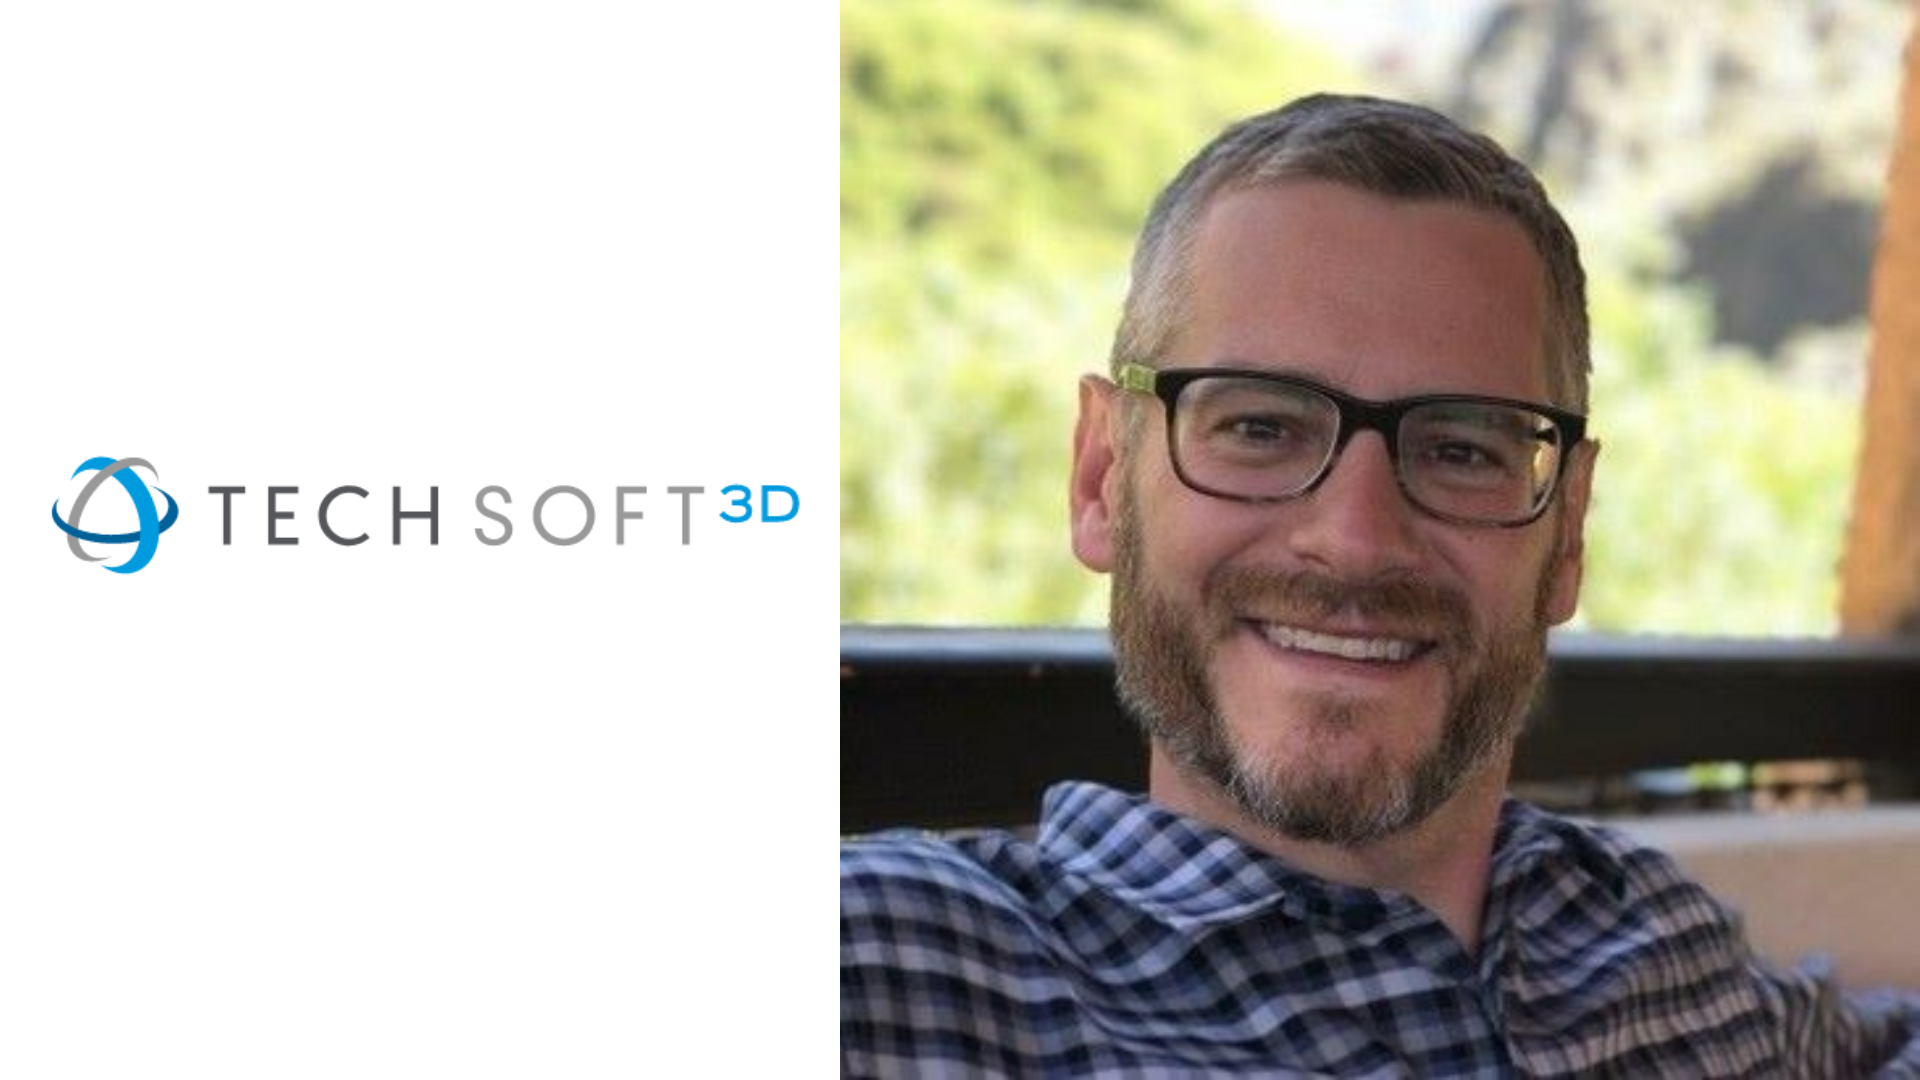 Tech Soft 3D announced  Tyler Barnes has been appointed President, marking a strategic milestone for the company.